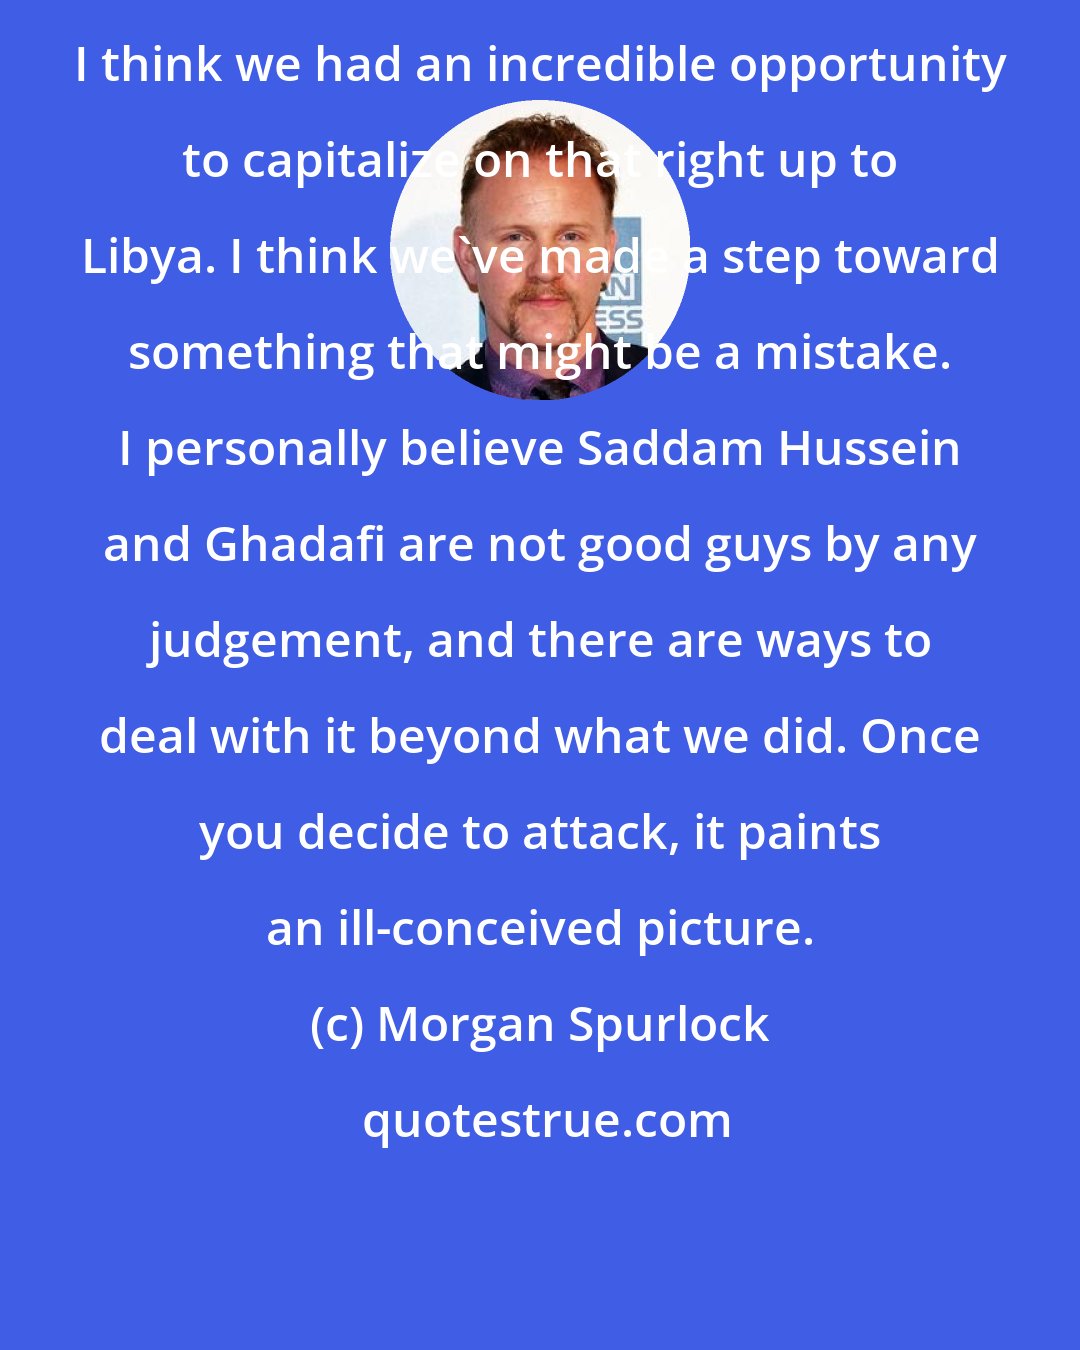 Morgan Spurlock: I think we had an incredible opportunity to capitalize on that right up to Libya. I think we've made a step toward something that might be a mistake. I personally believe Saddam Hussein and Ghadafi are not good guys by any judgement, and there are ways to deal with it beyond what we did. Once you decide to attack, it paints an ill-conceived picture.